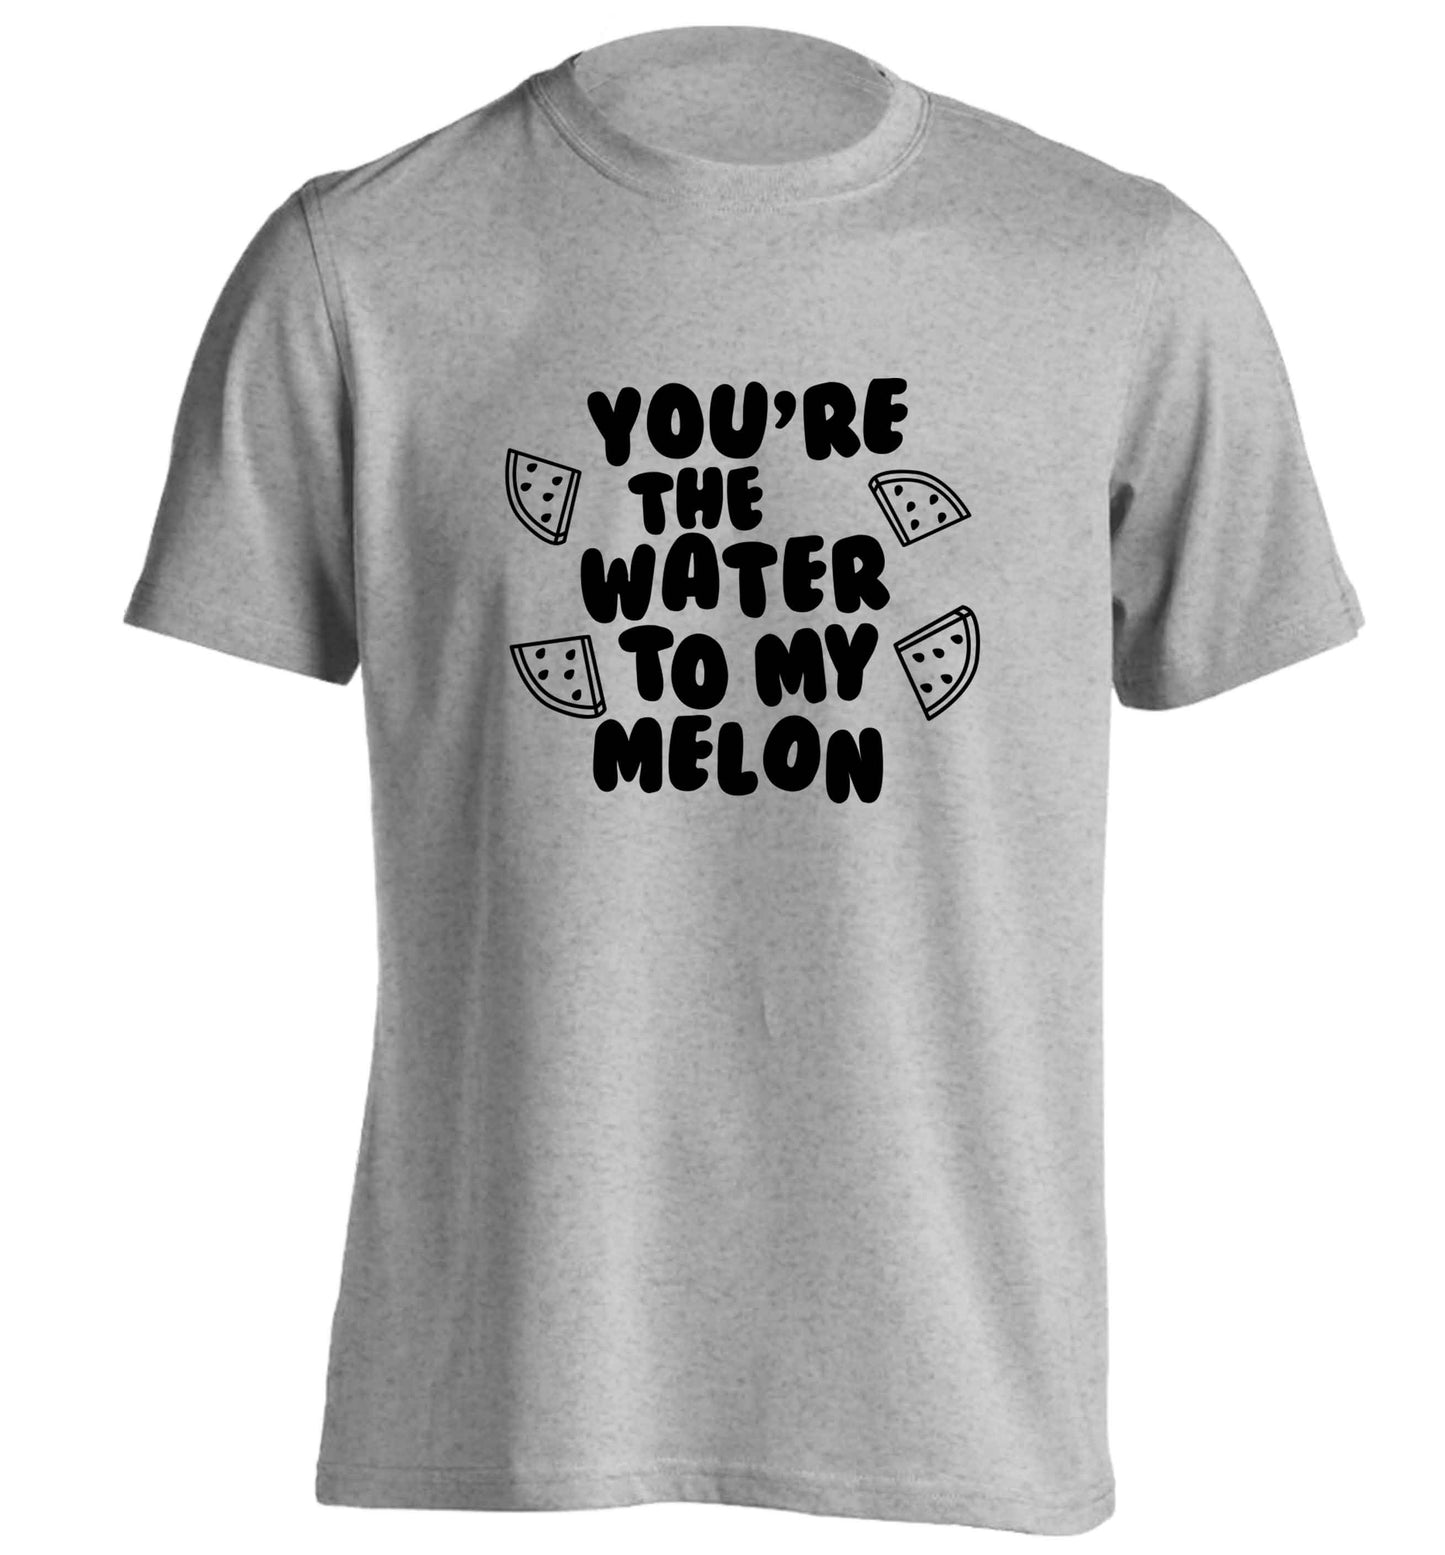 You're the water to my melon adults unisex grey Tshirt 2XL